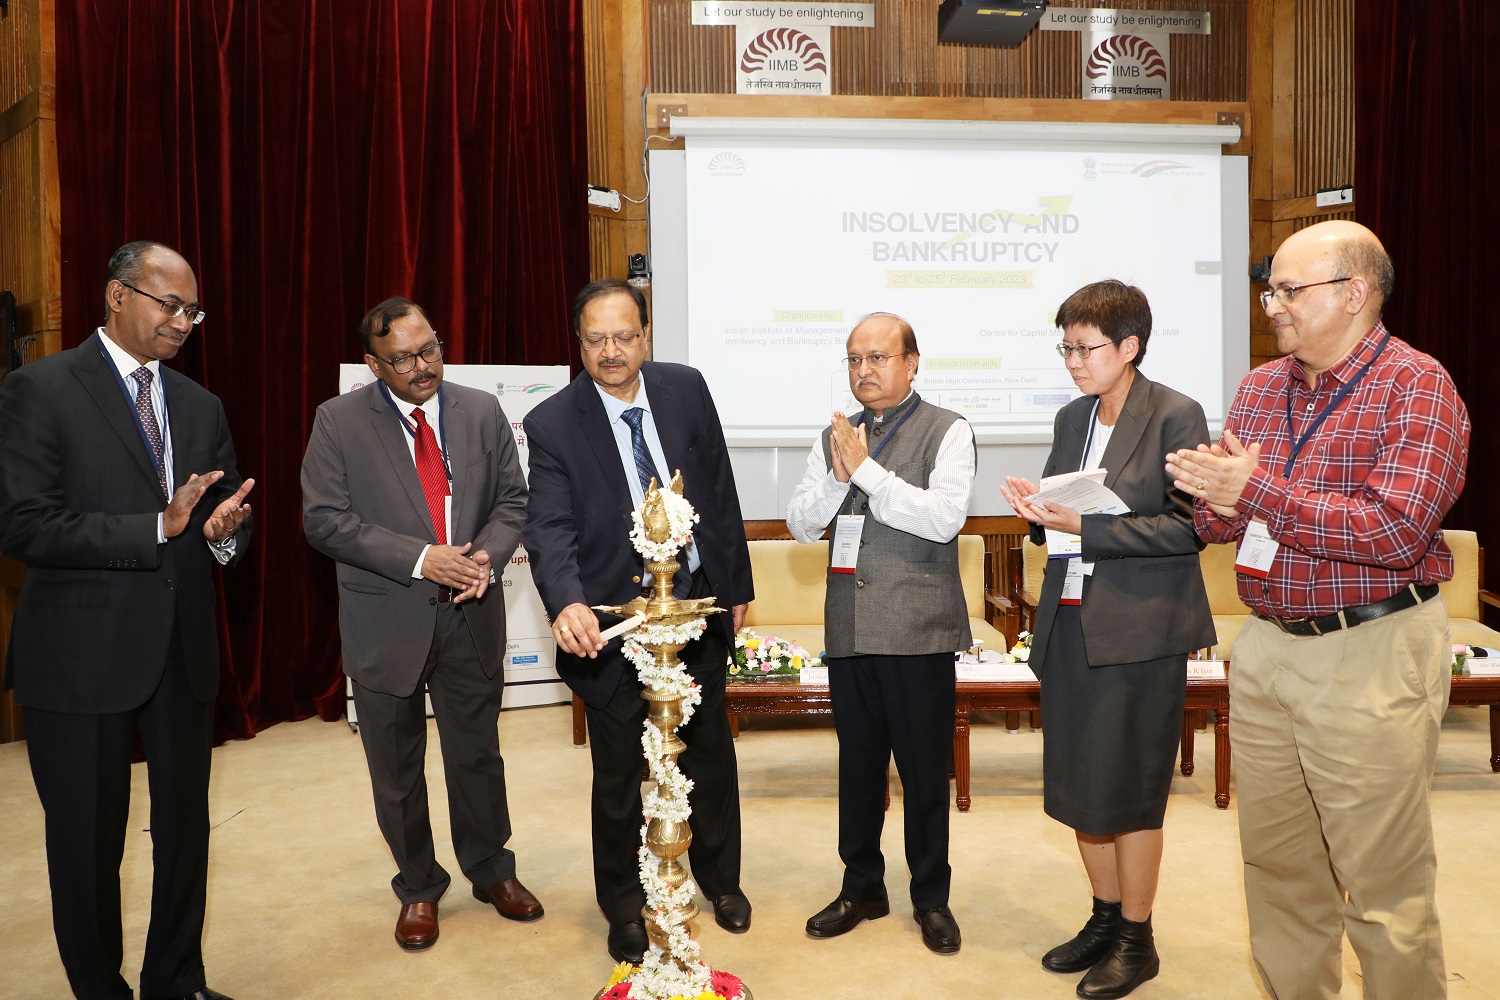 Hon’ble Chief Justice (former) Ramalingam Sudhakar, President, National Company Law Tribunal, inaugurates the three-day second International Research Conference on Insolvency and Bankruptcy organized by IIMB’s Centre for Capital Markets and Risk Management, in partnership with the Insolvency and Bankruptcy Board of India, on 23 February 2023. Also present is Prof. Rishikesha T Krishnan, Director, IIM Bangalore, along with other dignitaries.